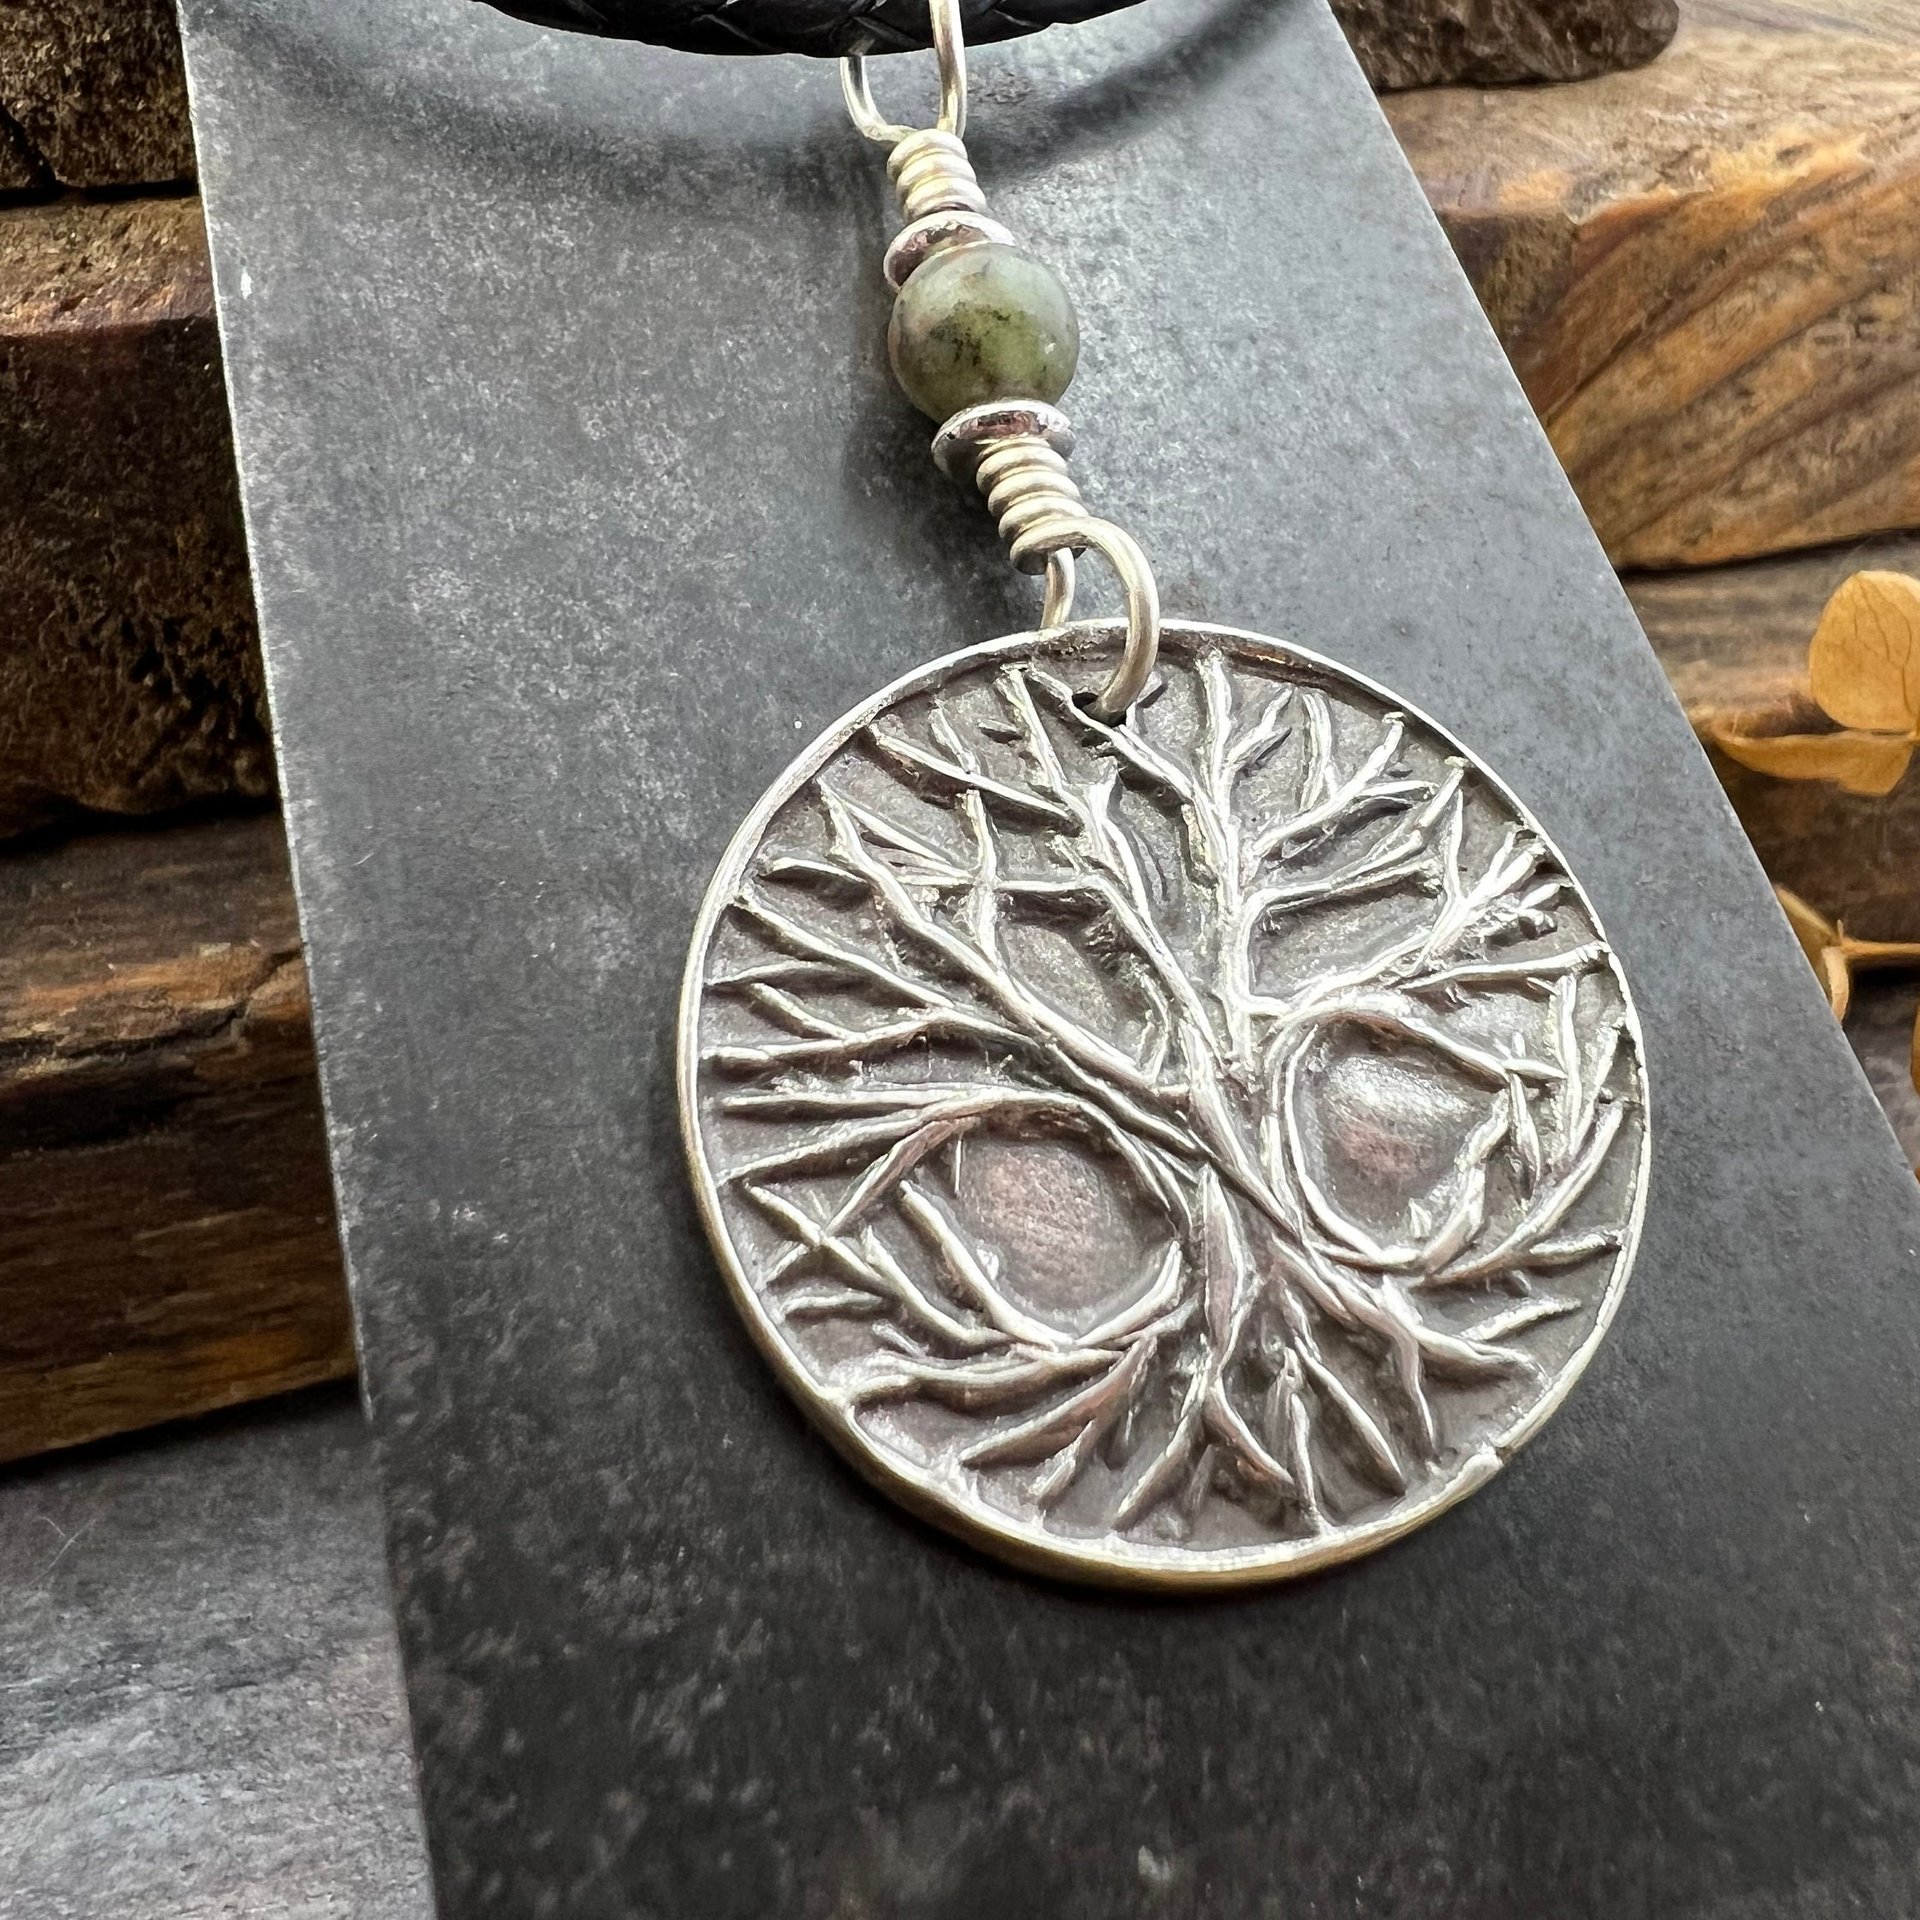 Celtic Tree of Life Pendant, Sterling Silver, Connemara Marble, Sacred Celtic Trees, Irish Celtic Spirals, Druid Dryad, Crann Bethadh, Witch